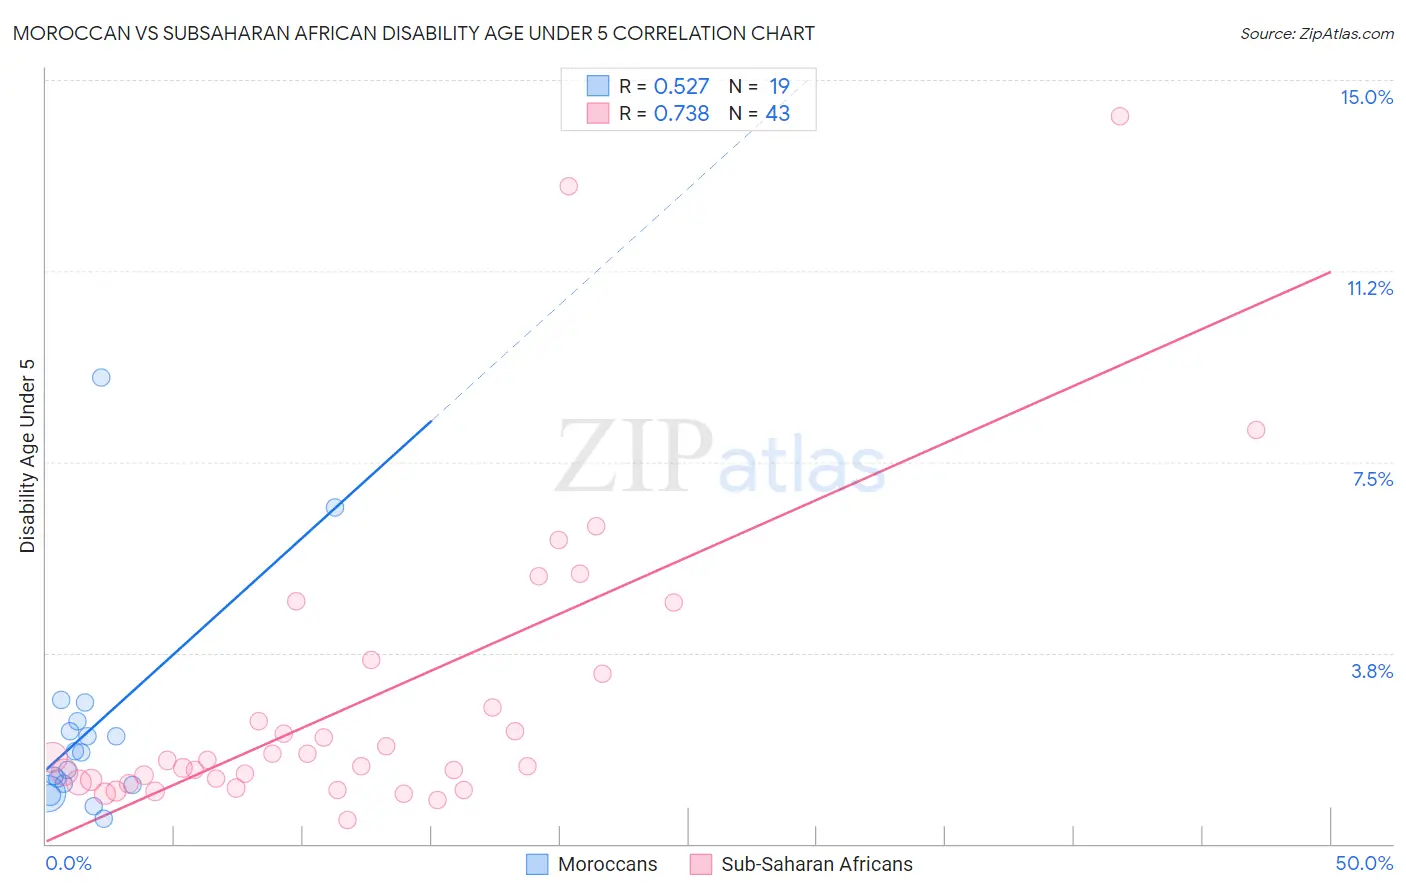 Moroccan vs Subsaharan African Disability Age Under 5